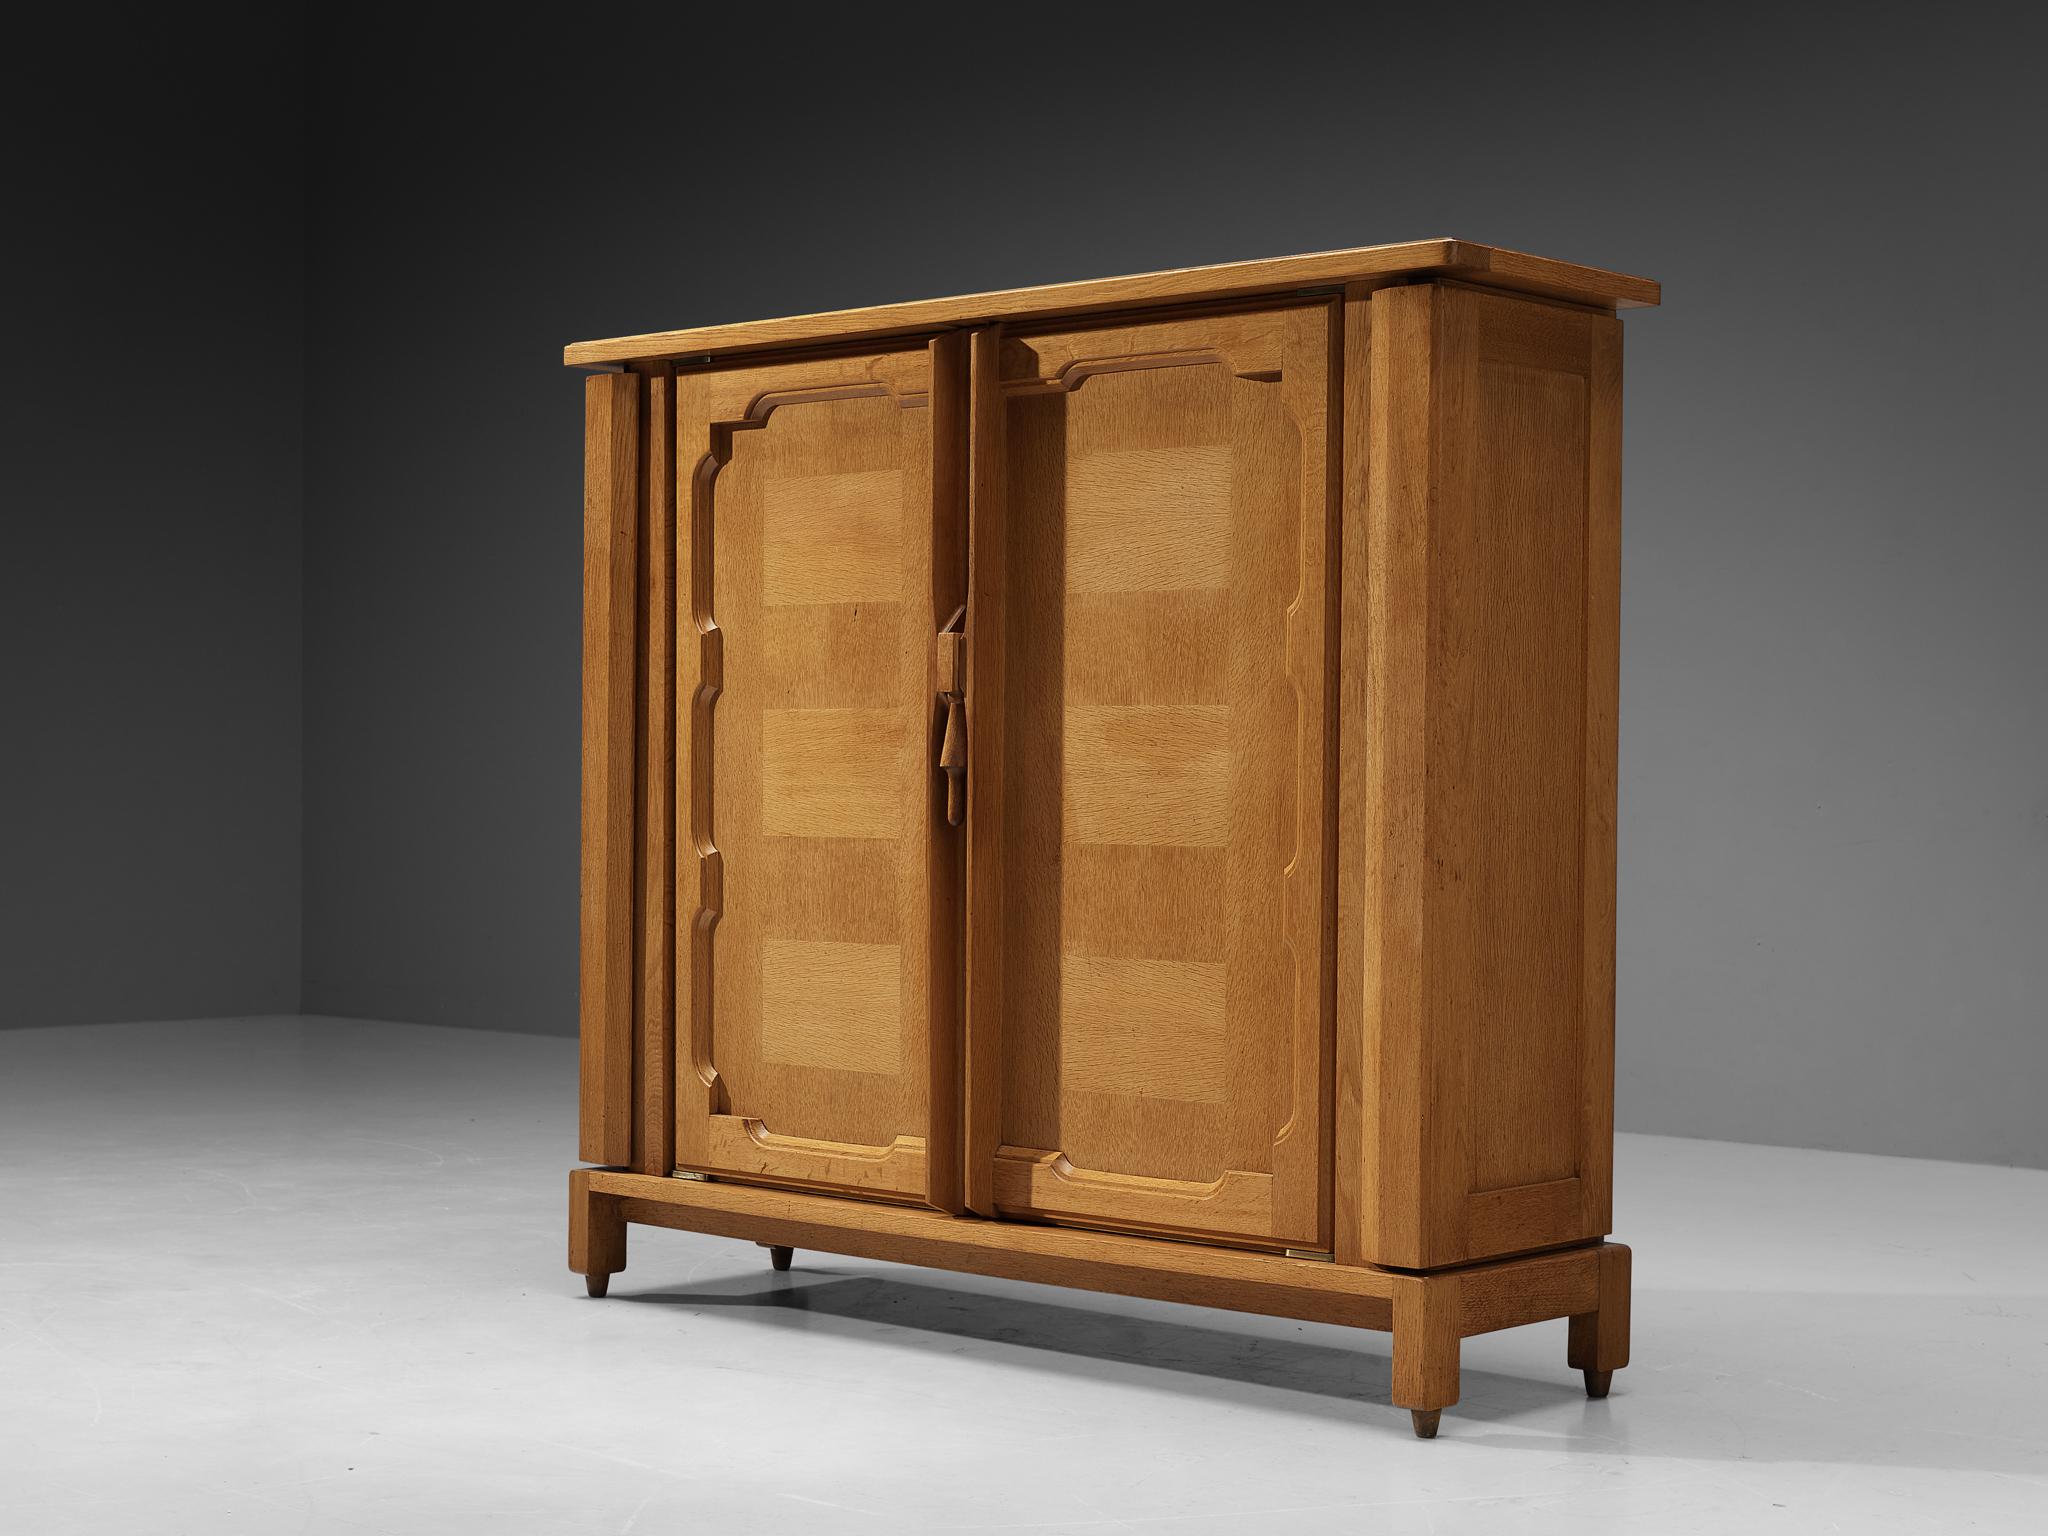 Guillerme et Chambron for Votre Maison, 'Bouvine' cabinet, oak, France, 1960s

This case piece is designed by Guillerme and Chambron and features two large doors, both with framed oak inlays around the edges. Down the centre there is a lever that is